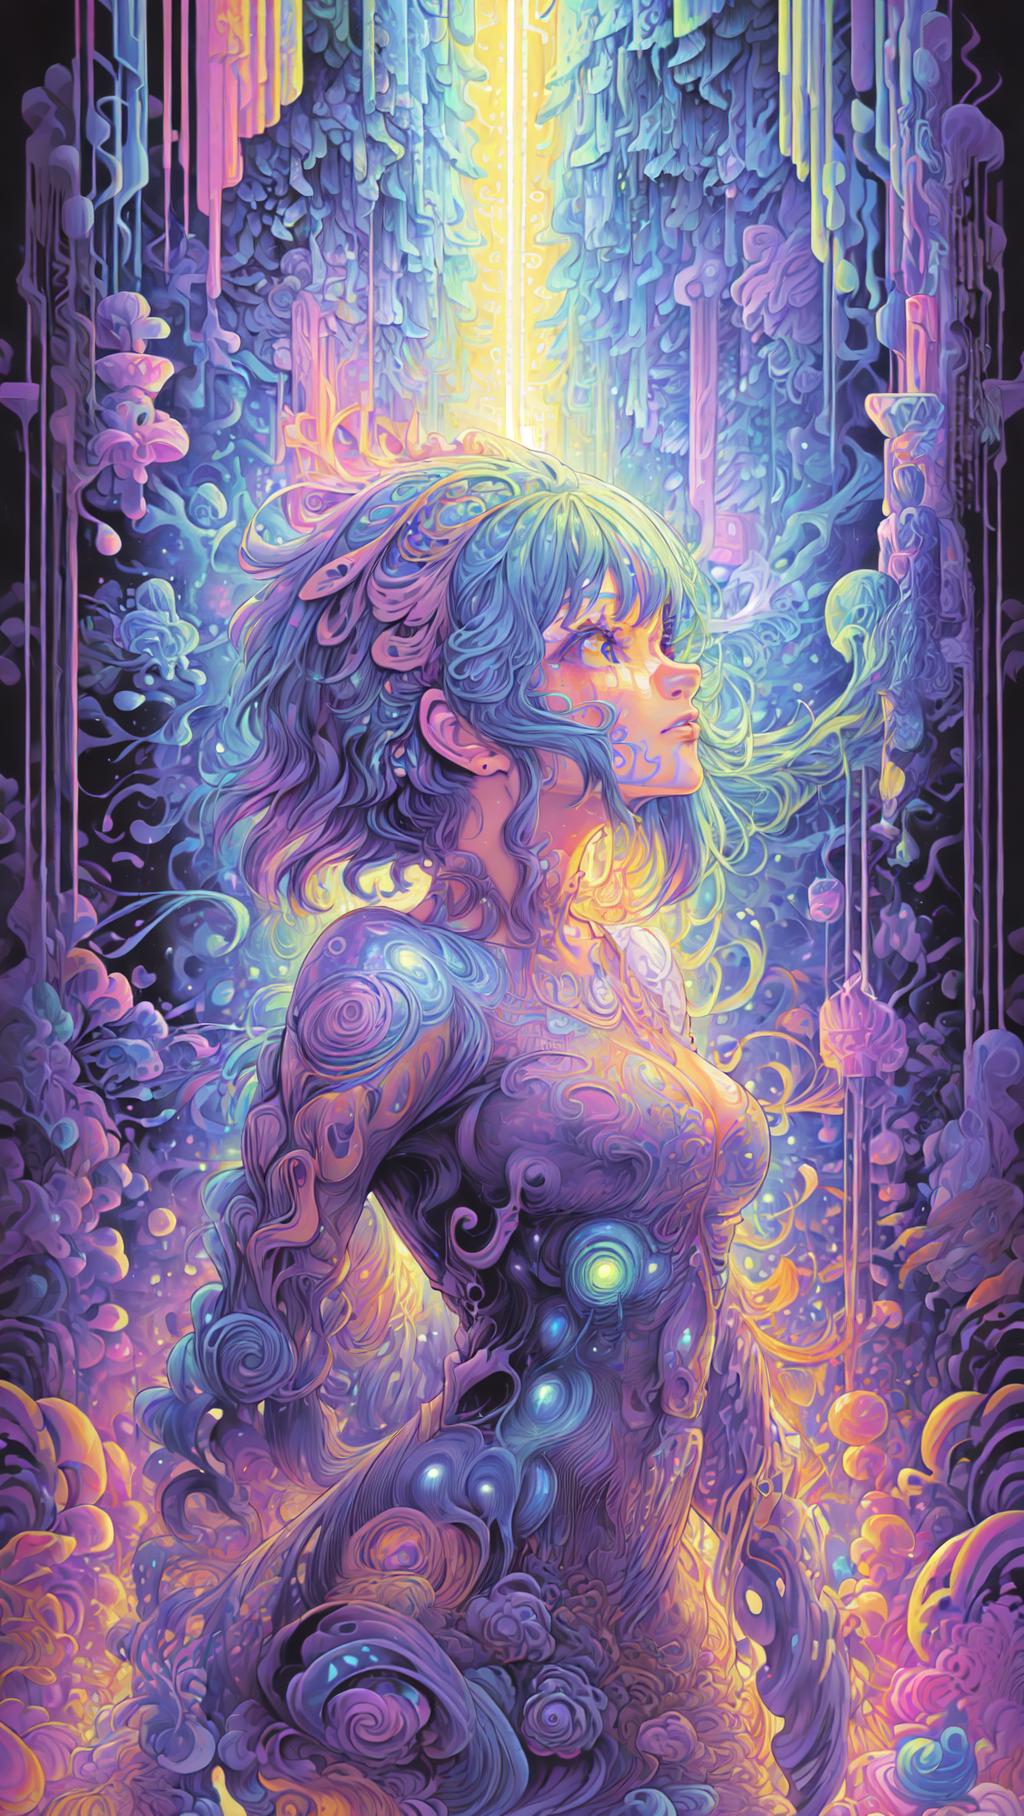 A colorful fantasy artwork of a woman with green hair and blue eyes, surrounded by a vibrant and psychedelic background.